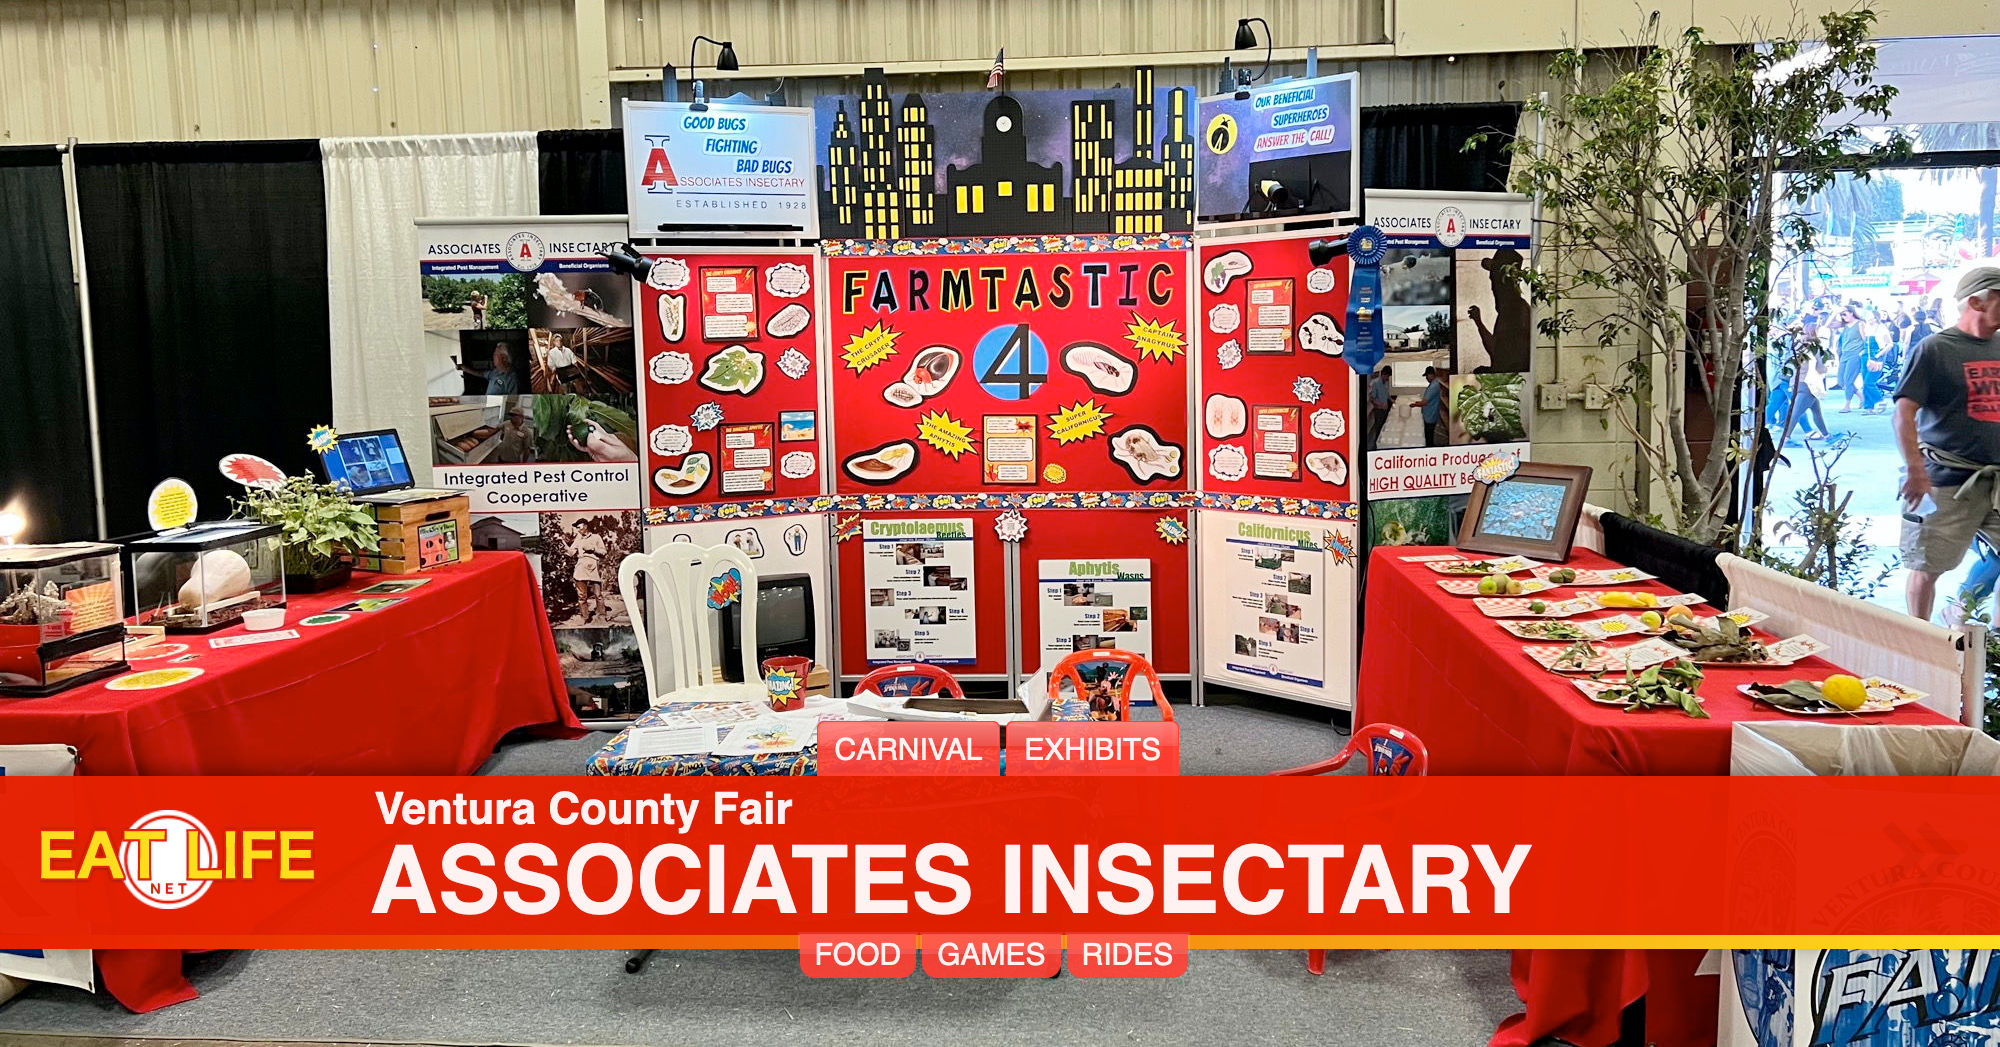 Associates Insectary